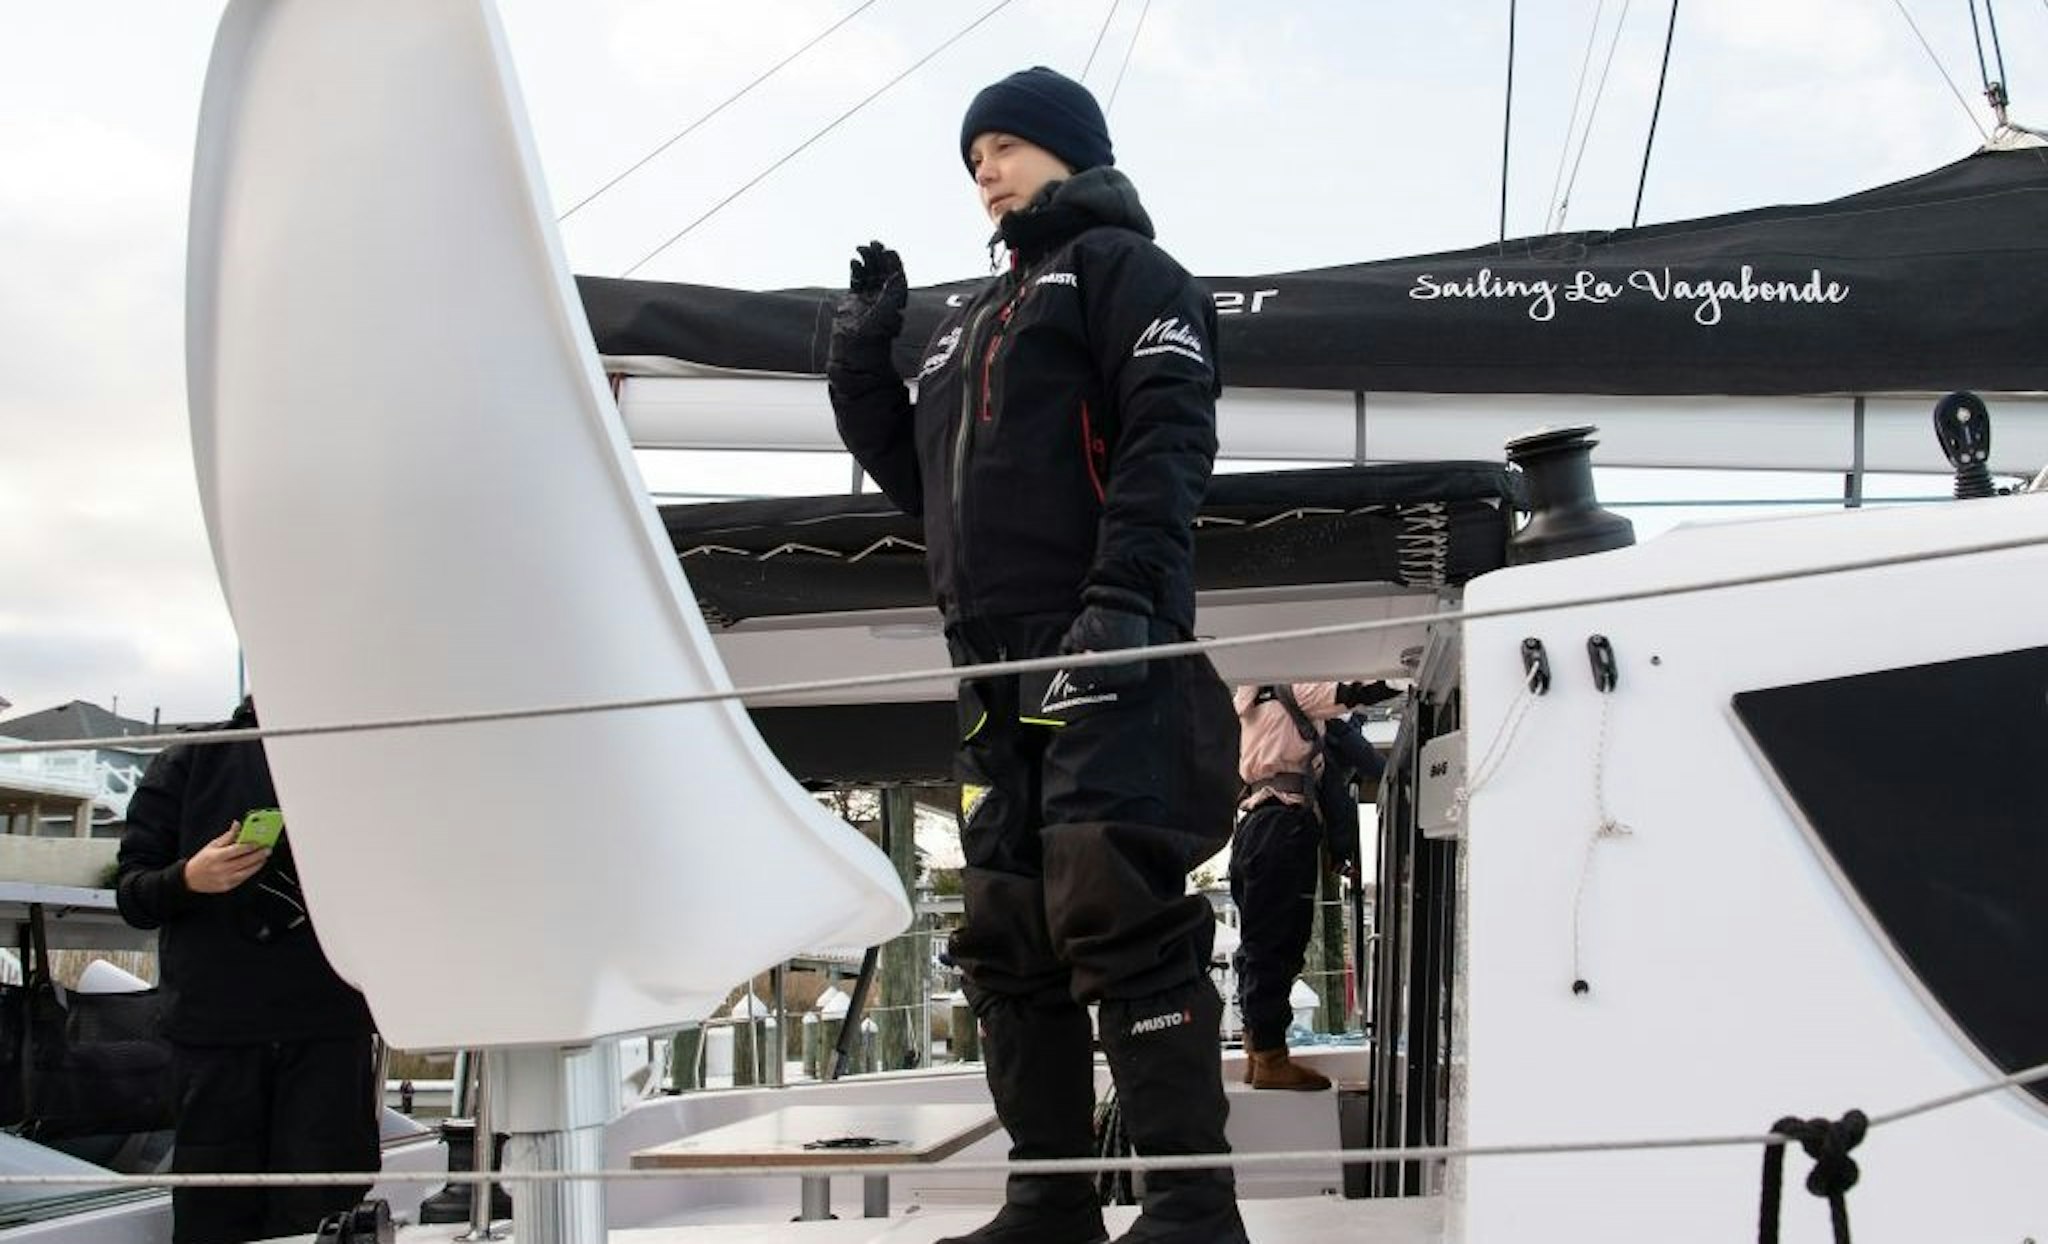 Swedish climate activist Greta Thunberg waves from aboard the catamaran La Vagabonde as she sets sail to Europe in Hampton, Virginia, on November 13, 2019. - "Extremely educational" is how Greta Thunberg sums up her North American sojourn as she prepares to cross the Atlantic once more, this time bound back for Europe. The 16-year-old Swede, who became world famous for founding the "school strikes for the climate," will set sail Wednesday morning, weather permitting, after 11 hectic weeks of criss-crossing the US and Canada, making headlines at every turn.